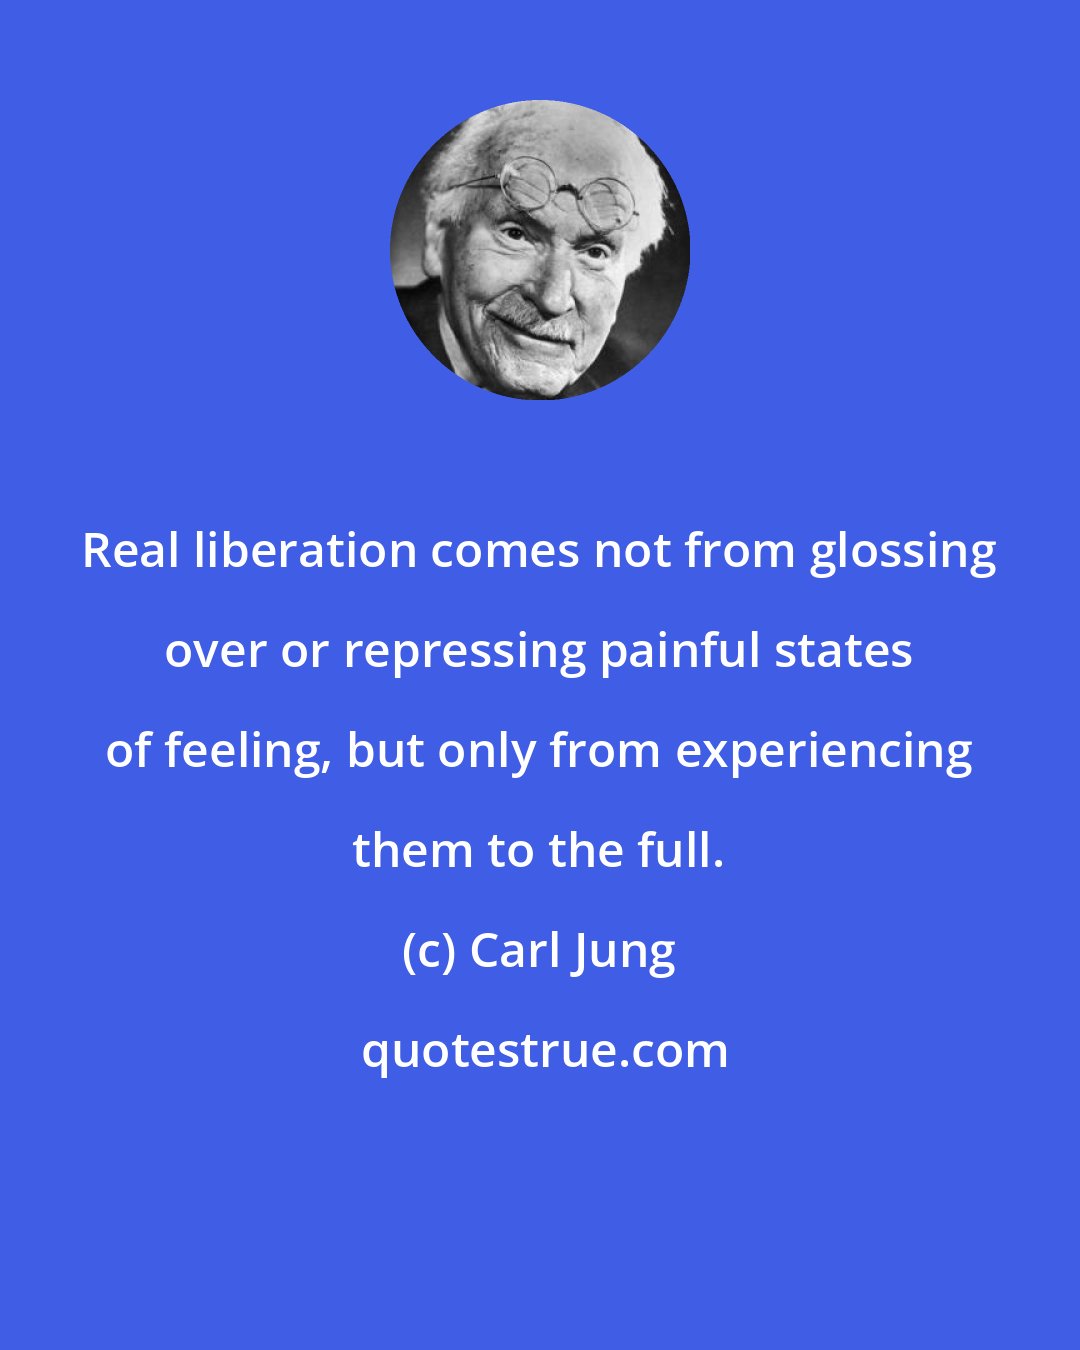 Carl Jung: Real liberation comes not from glossing over or repressing painful states of feeling, but only from experiencing them to the full.